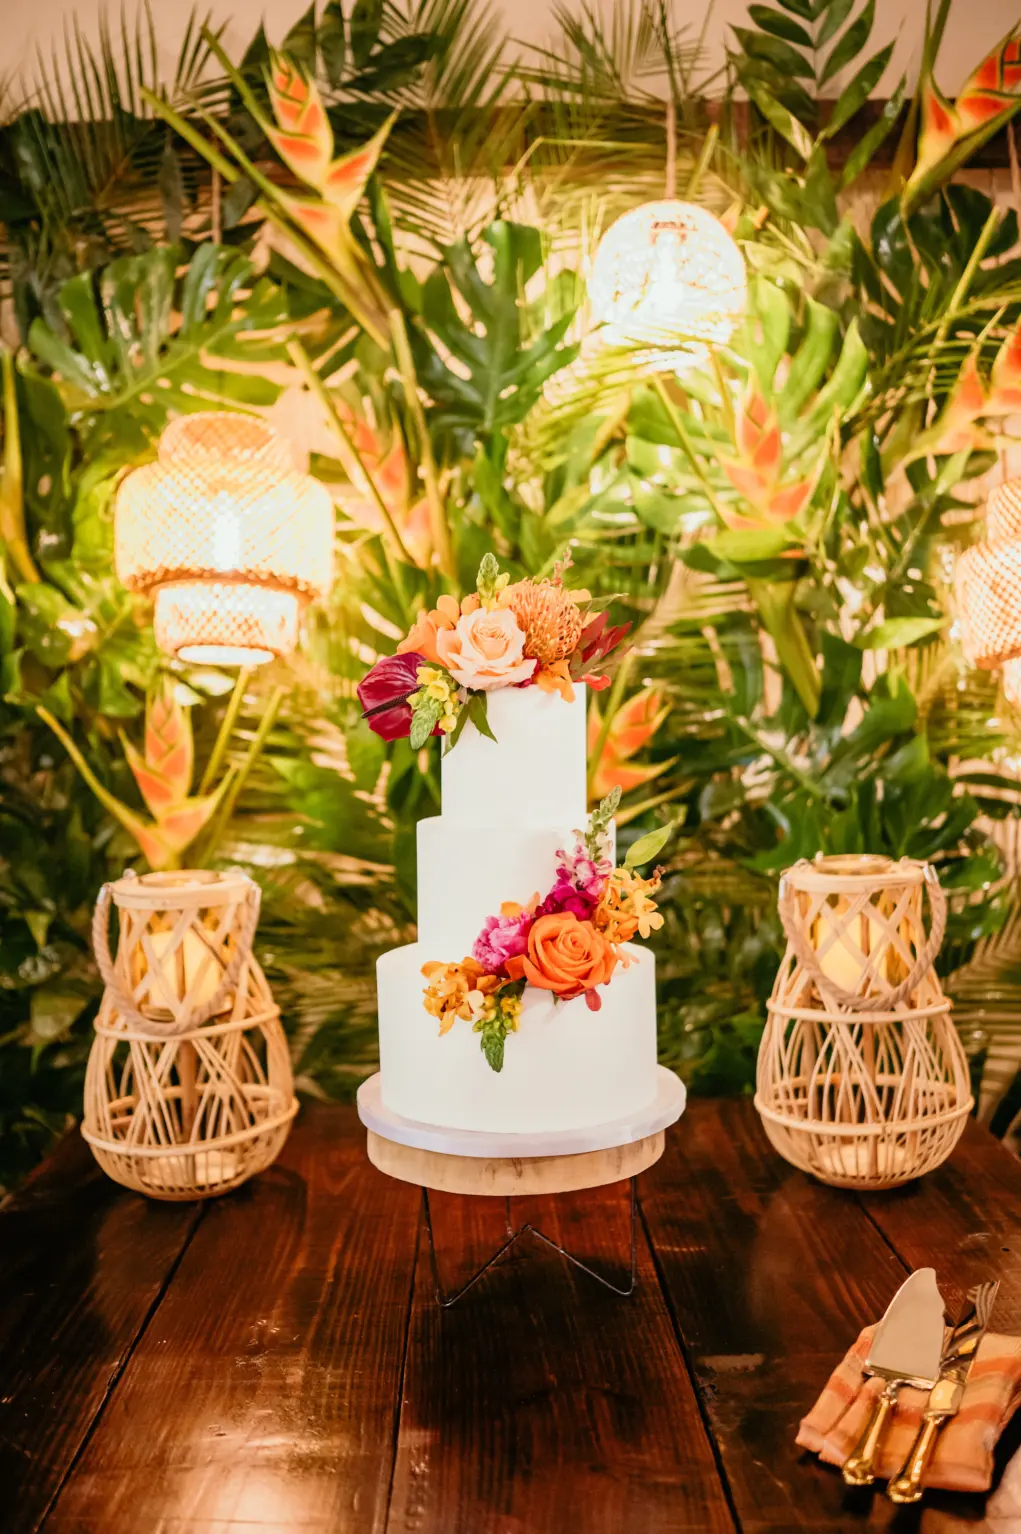 Boho Round White Three-Tiered Buttercream Wedding Cake Inspiration with Tropical Pink and Orange Roses, Protea Flowers | Bakery Tampa Bay Cake Company | St Pete Florist Save The Date Florida